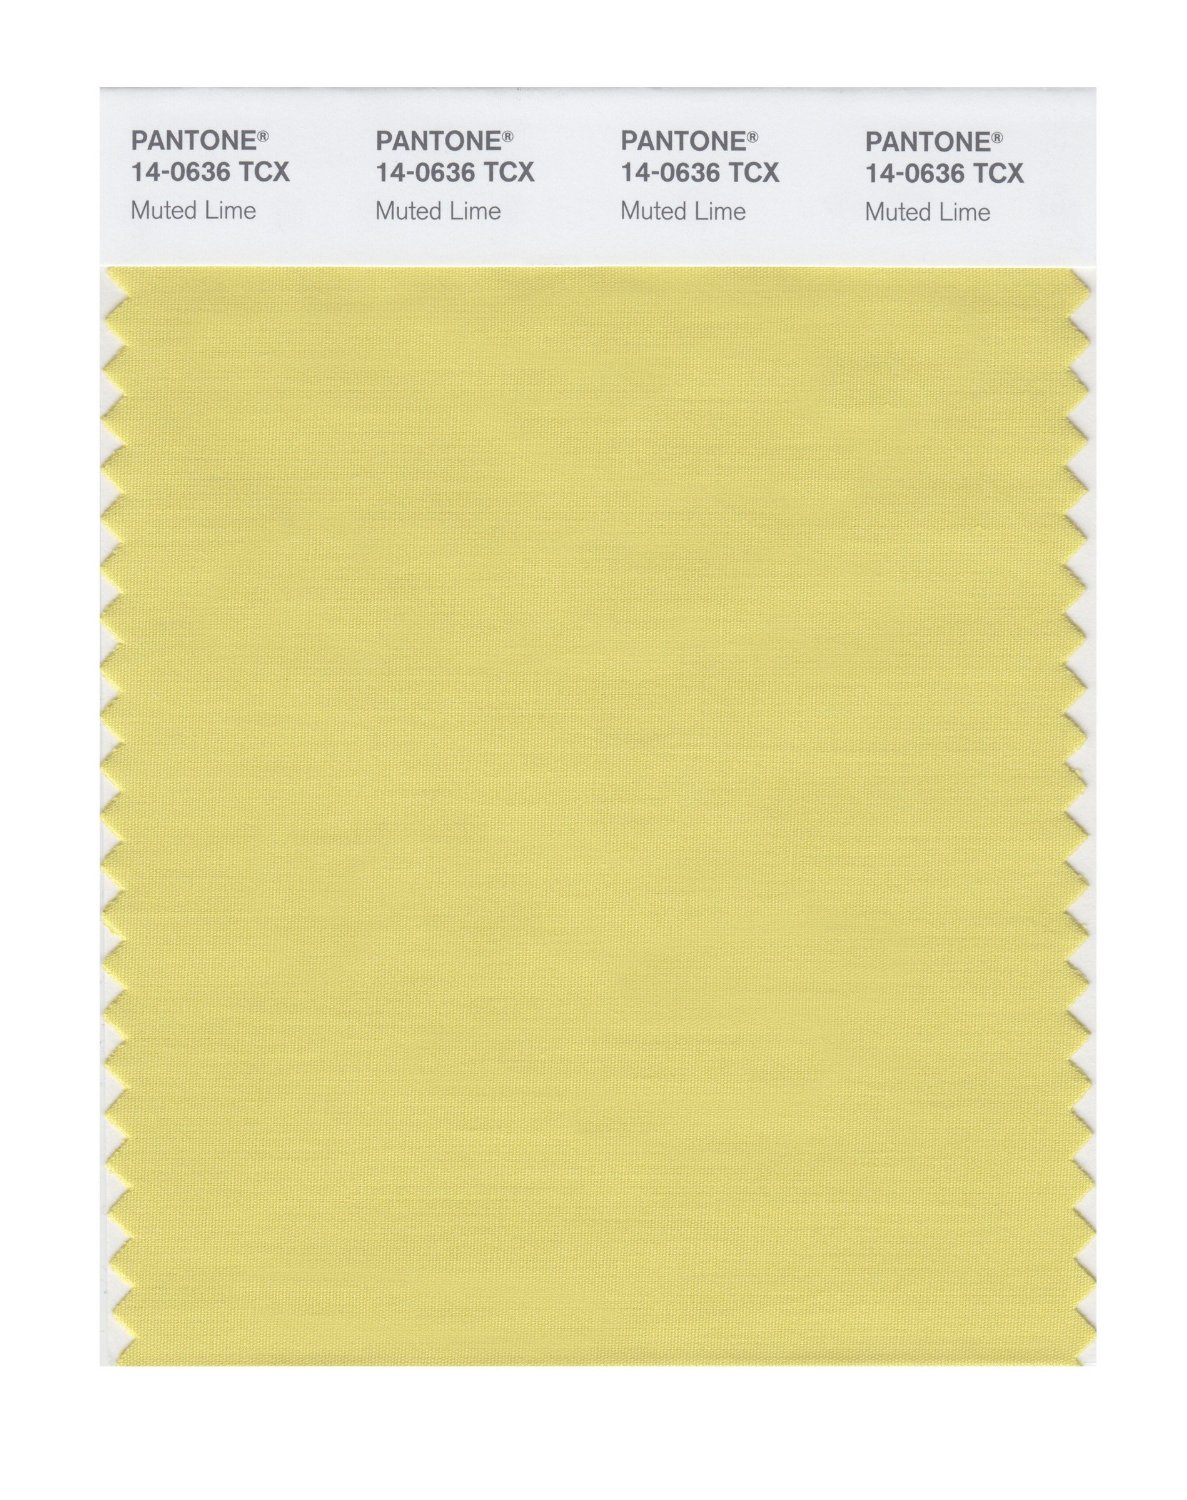 Pantone Cotton Swatch 14-0636 Muted Lime